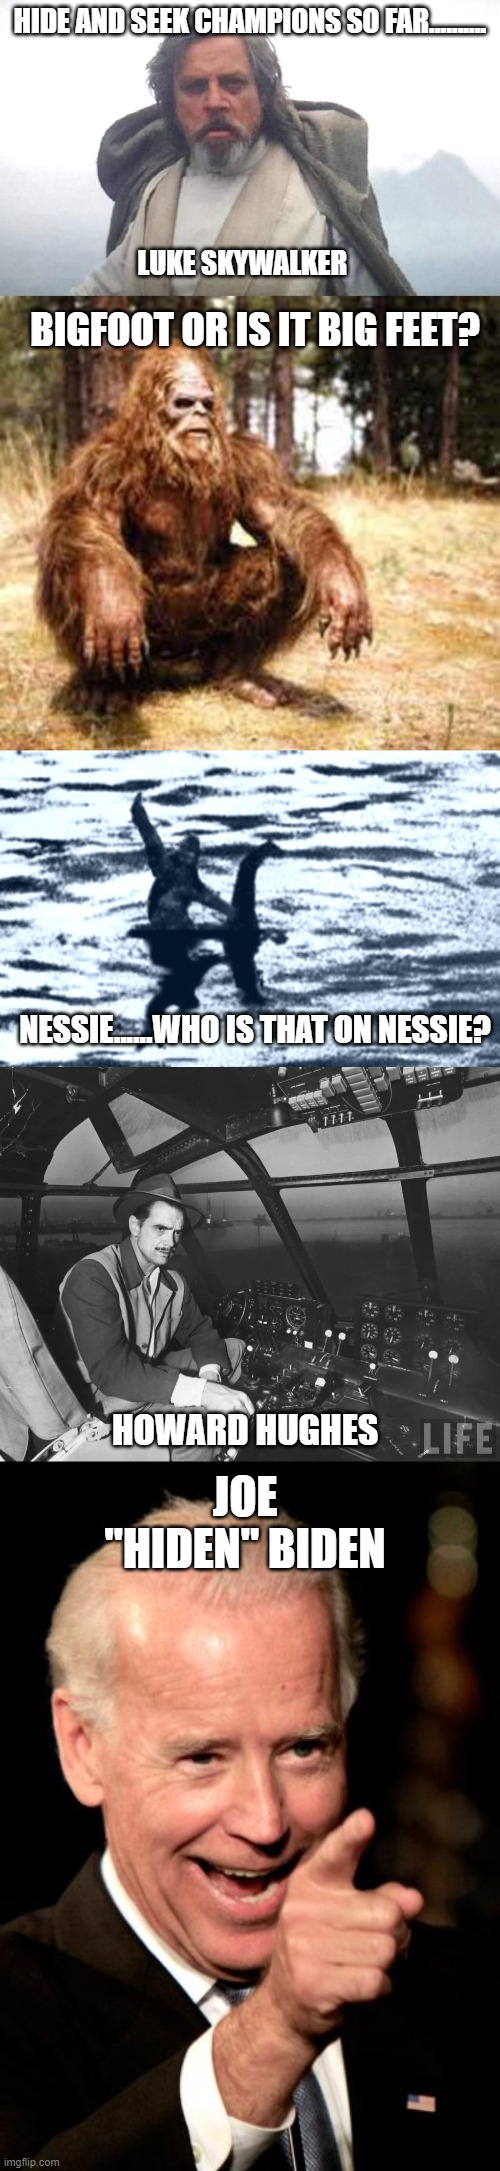 Hide and seek champions of Previous decades | HIDE AND SEEK CHAMPIONS SO FAR.......... LUKE SKYWALKER; BIGFOOT OR IS IT BIG FEET? NESSIE......WHO IS THAT ON NESSIE? HOWARD HUGHES; JOE "HIDEN" BIDEN | image tagged in memes,smilin biden,bigfoot,luke skywalker,howard hughes,loch ness and bigfoot | made w/ Imgflip meme maker